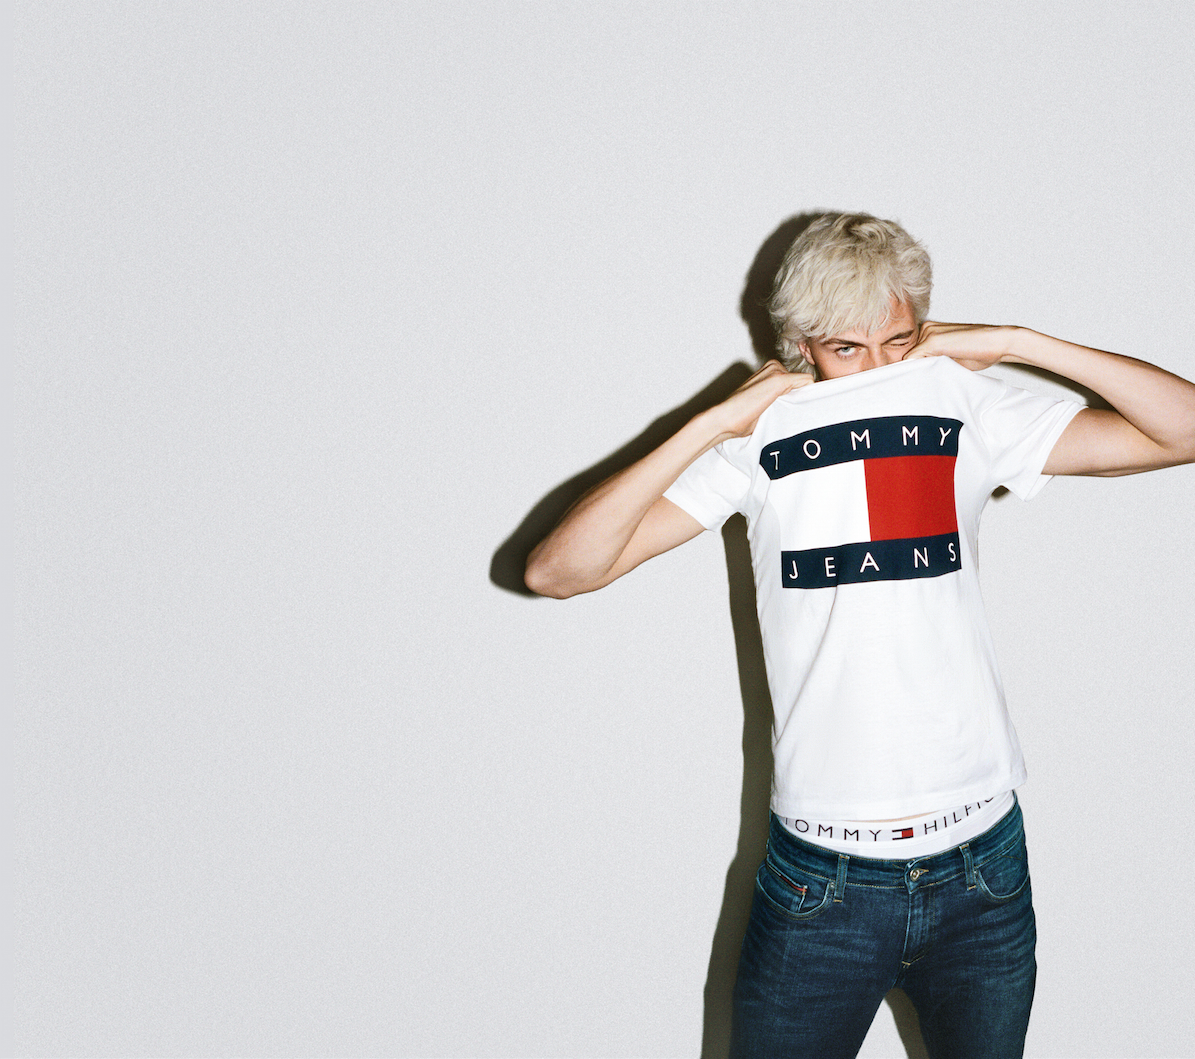 Tommy Jeans capsule collection - Crash 